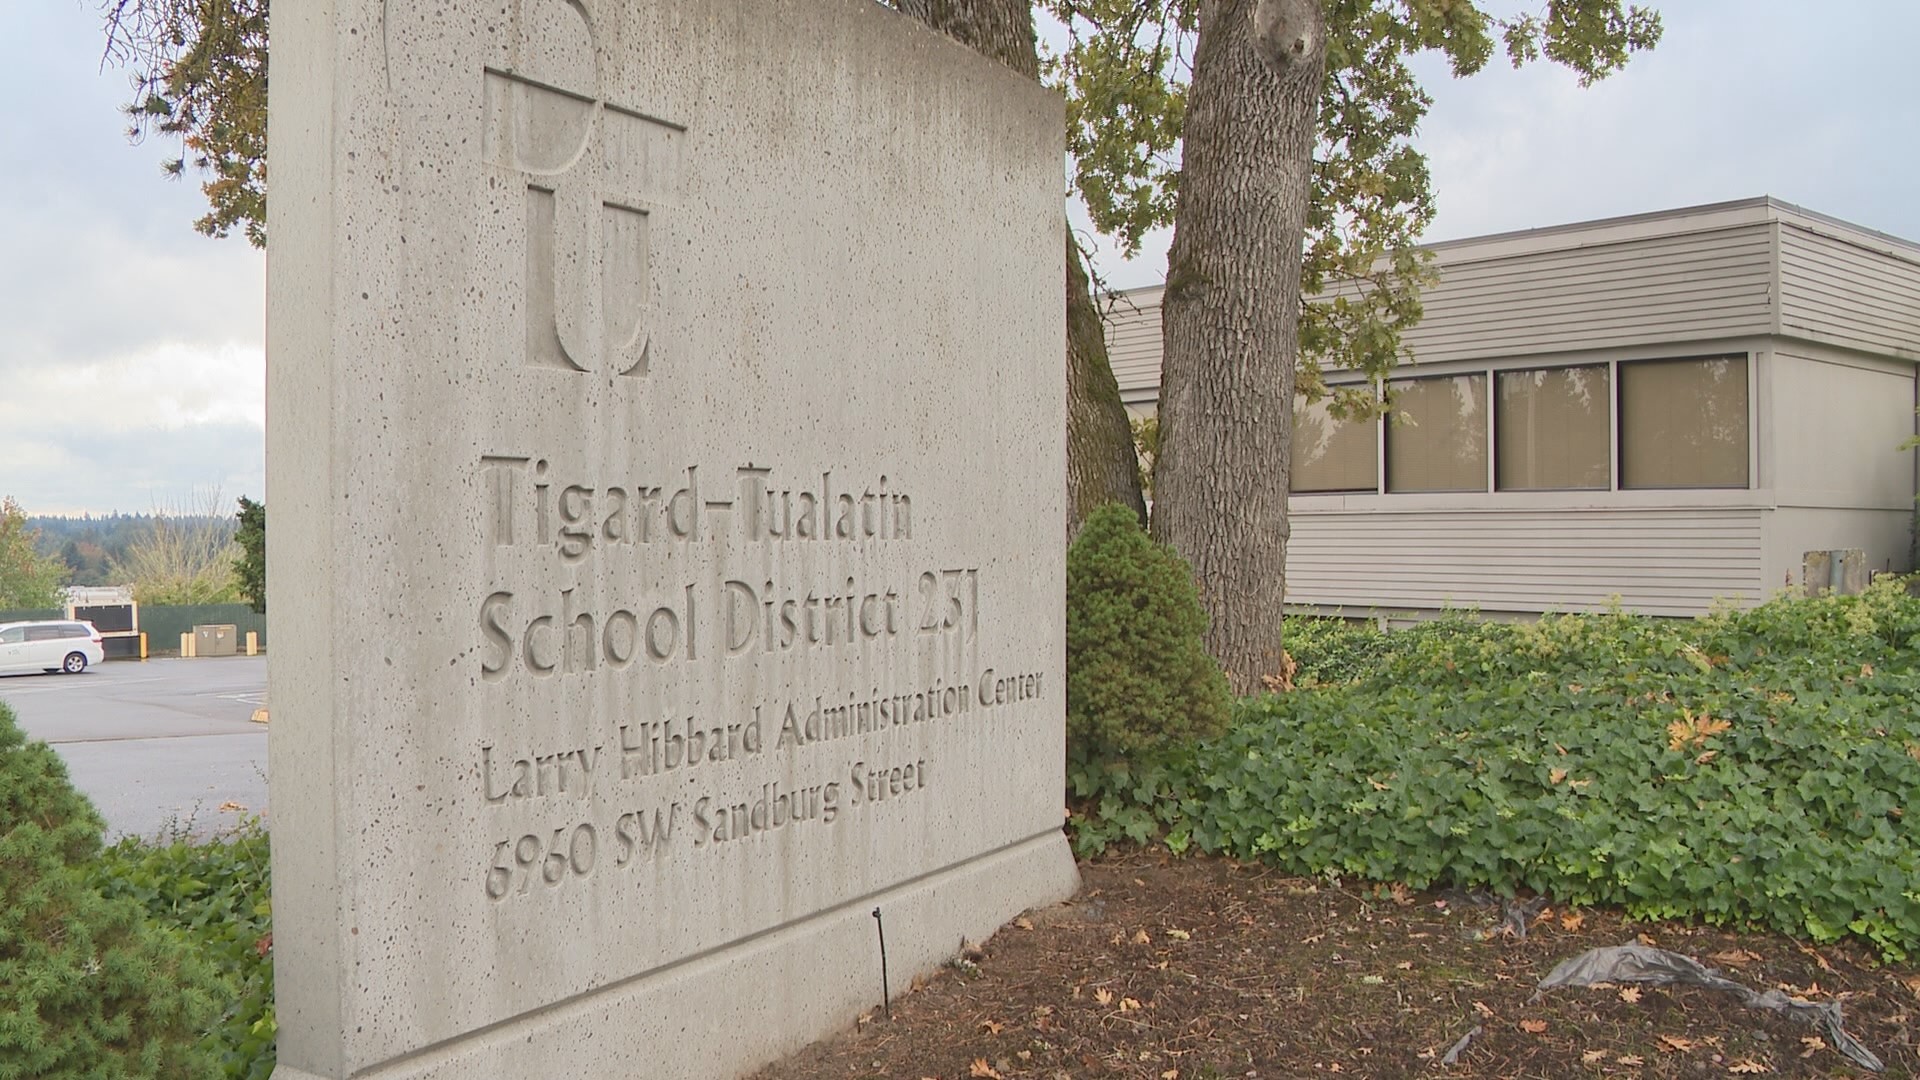 Parents of students in Tigard-Tualatin schools said they began a petition to oust the superintendent, because fights and class disruptions had increased greatly.